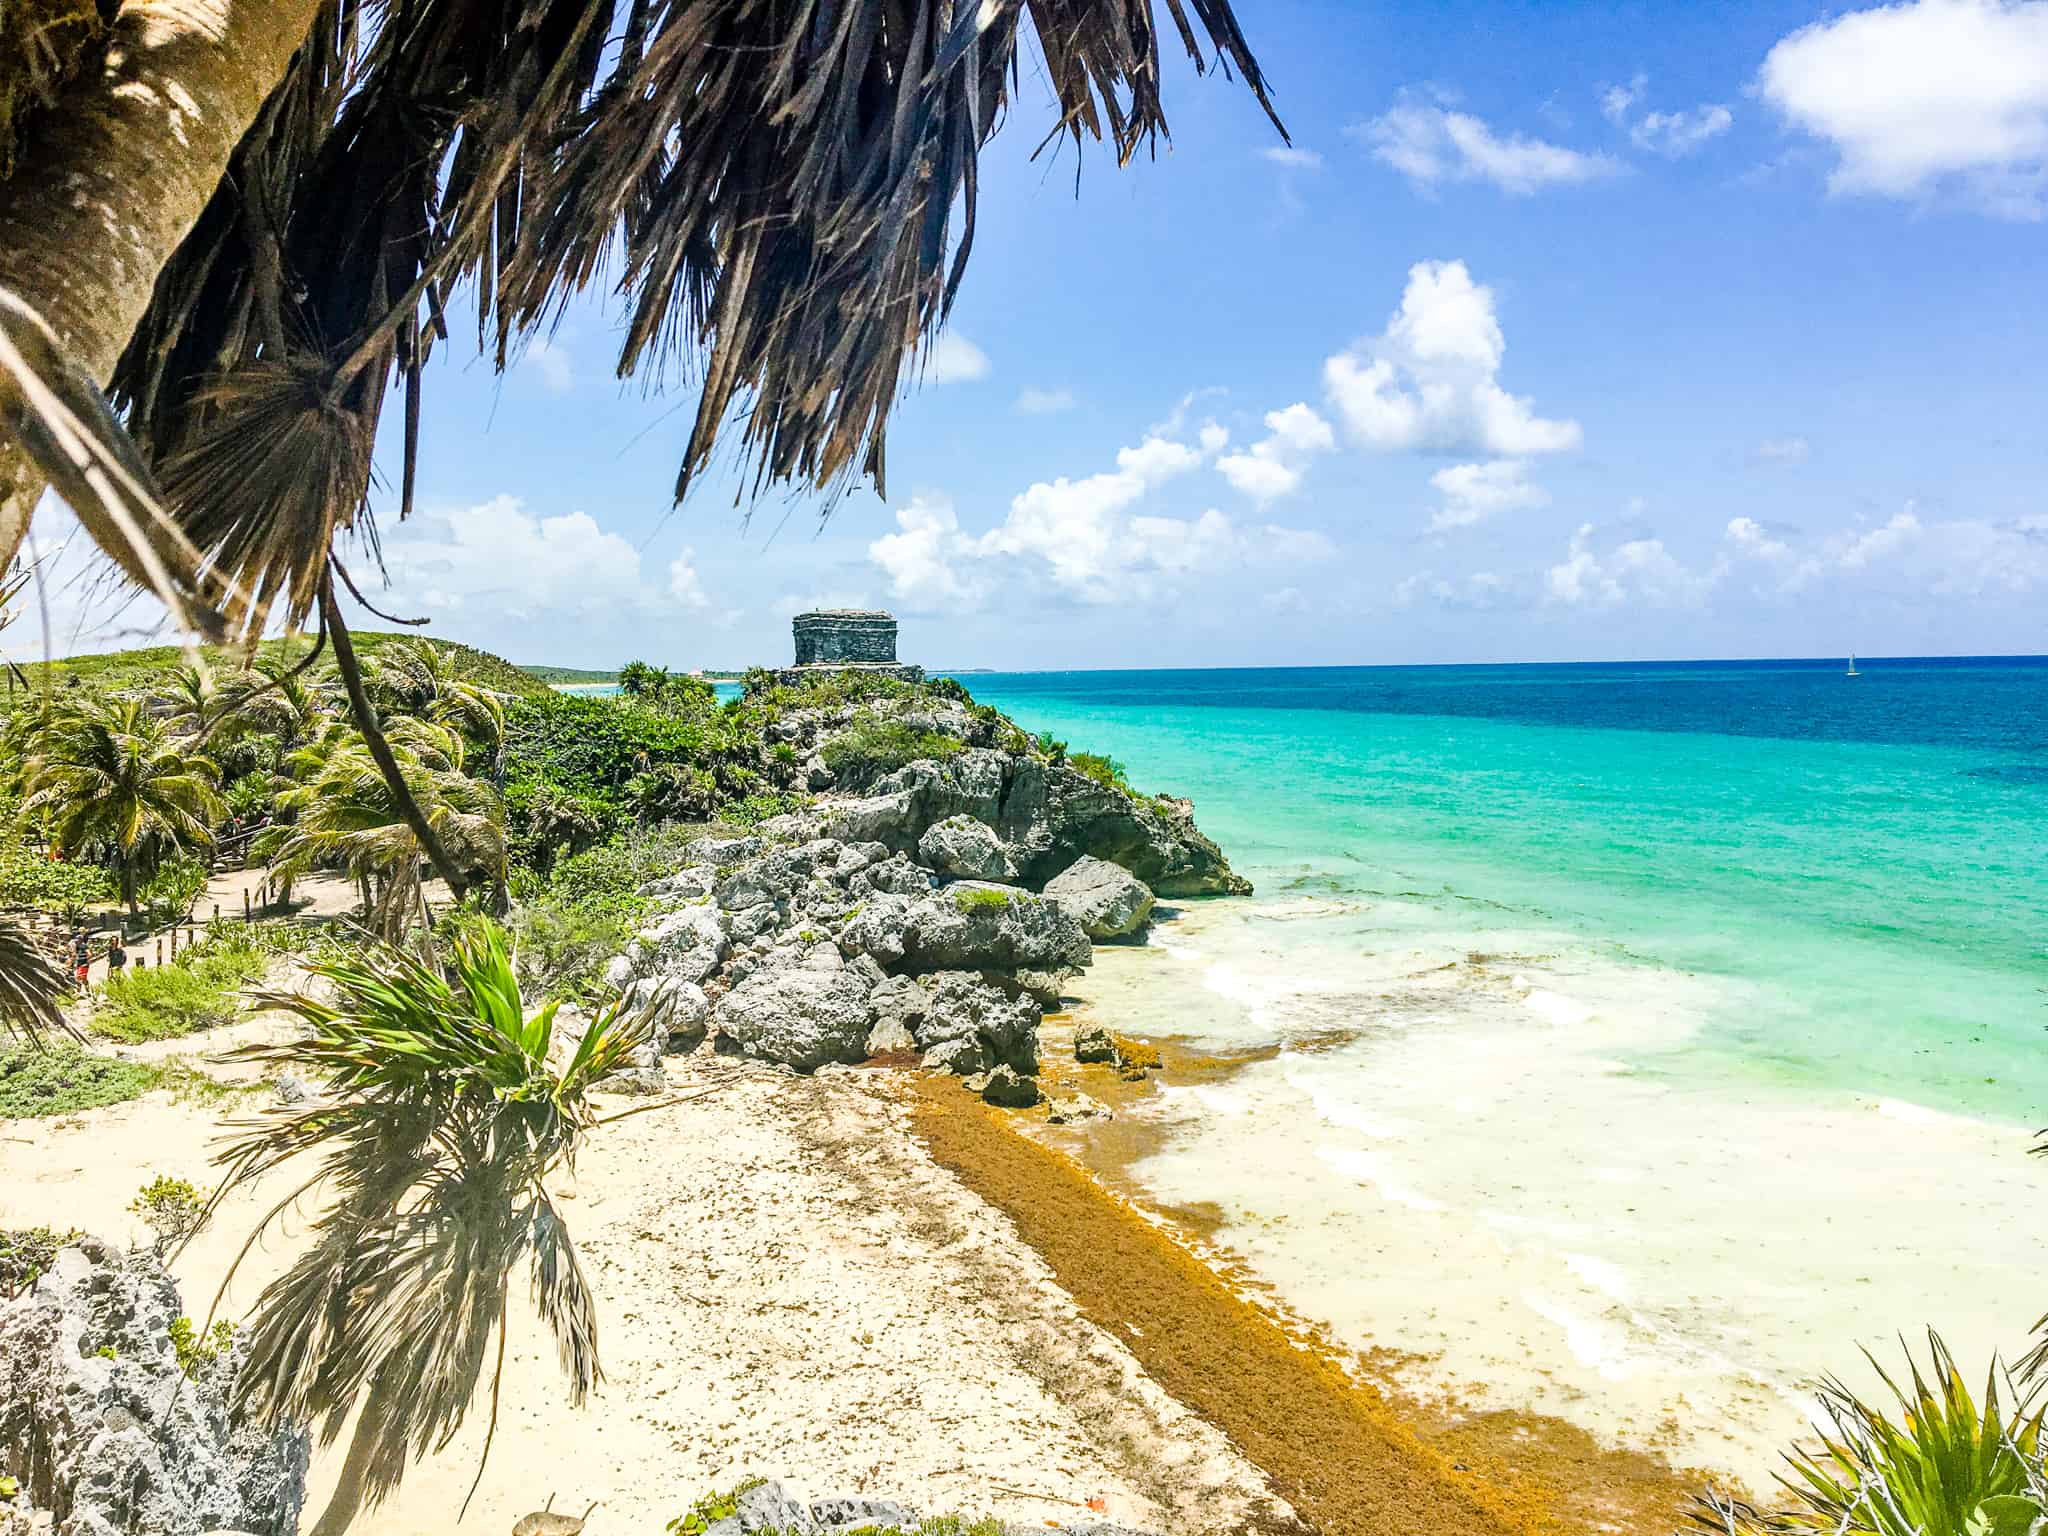 Mayan Ruins temple in Tulum, Mexico